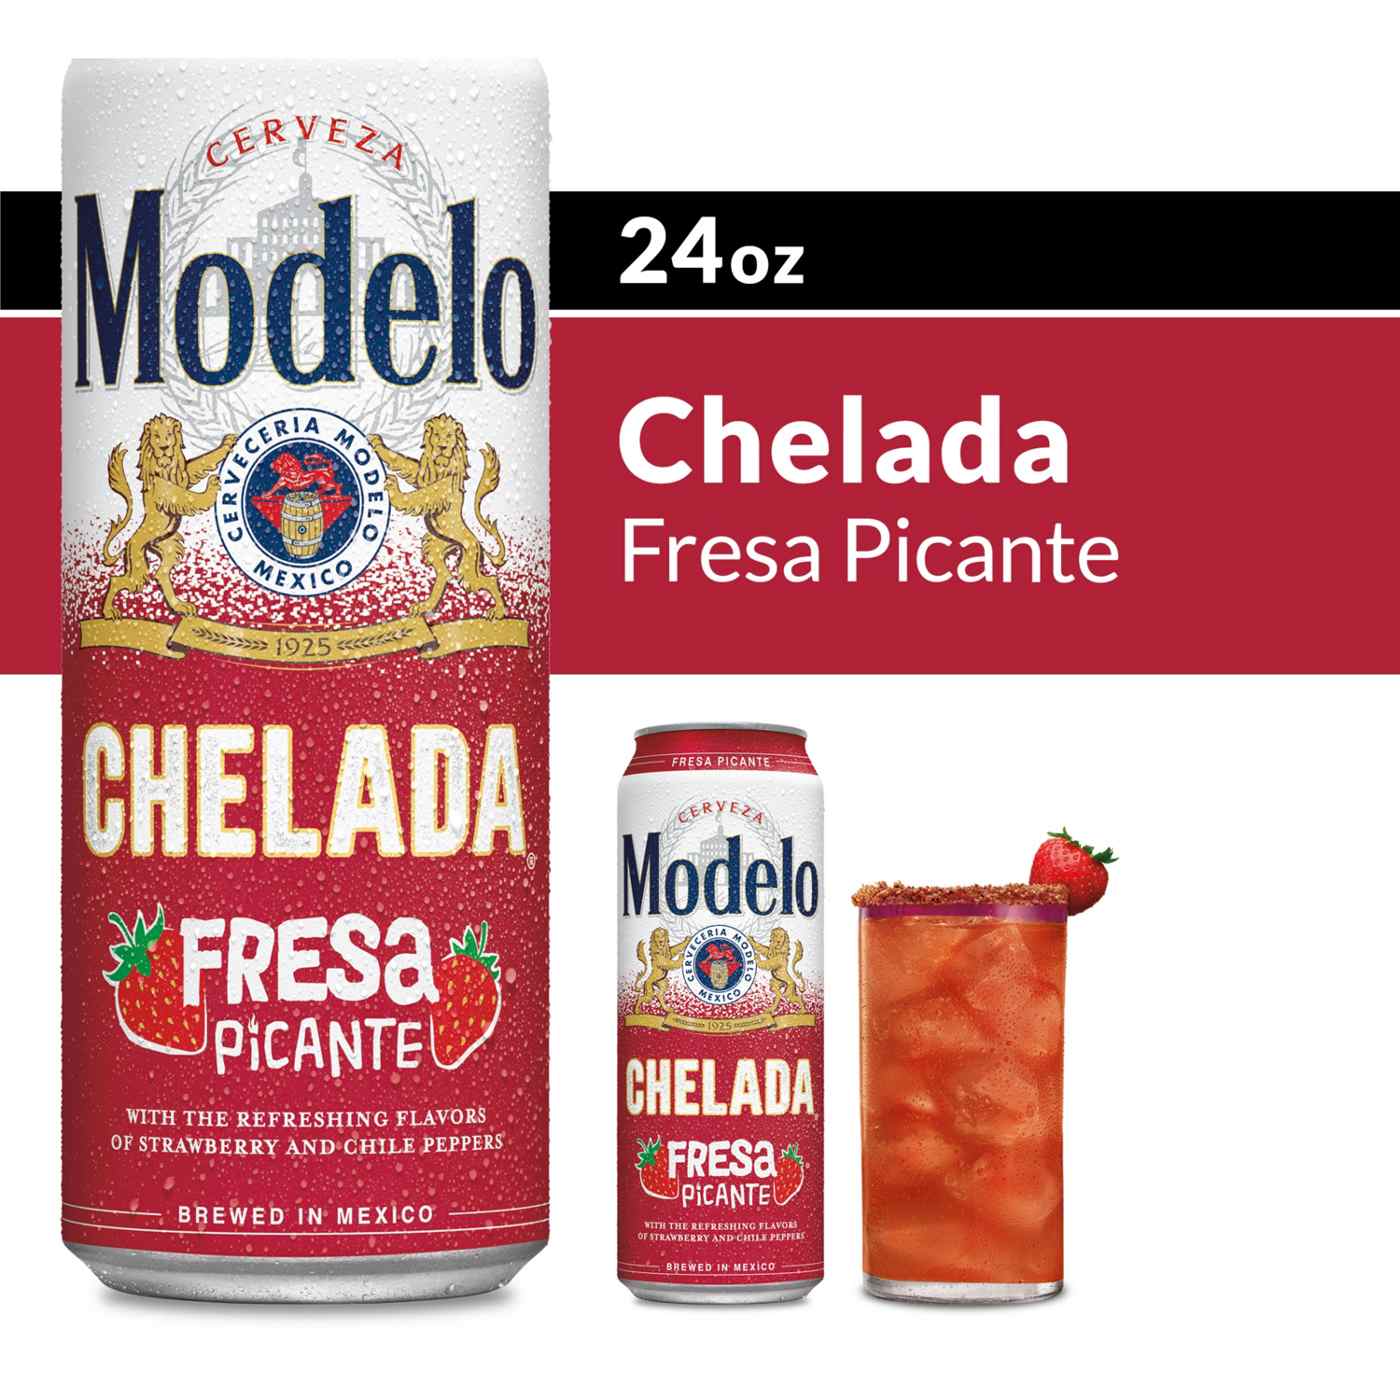 Modelo Chelada Fresa Picante Mexican Import Flavored Beer; image 9 of 9